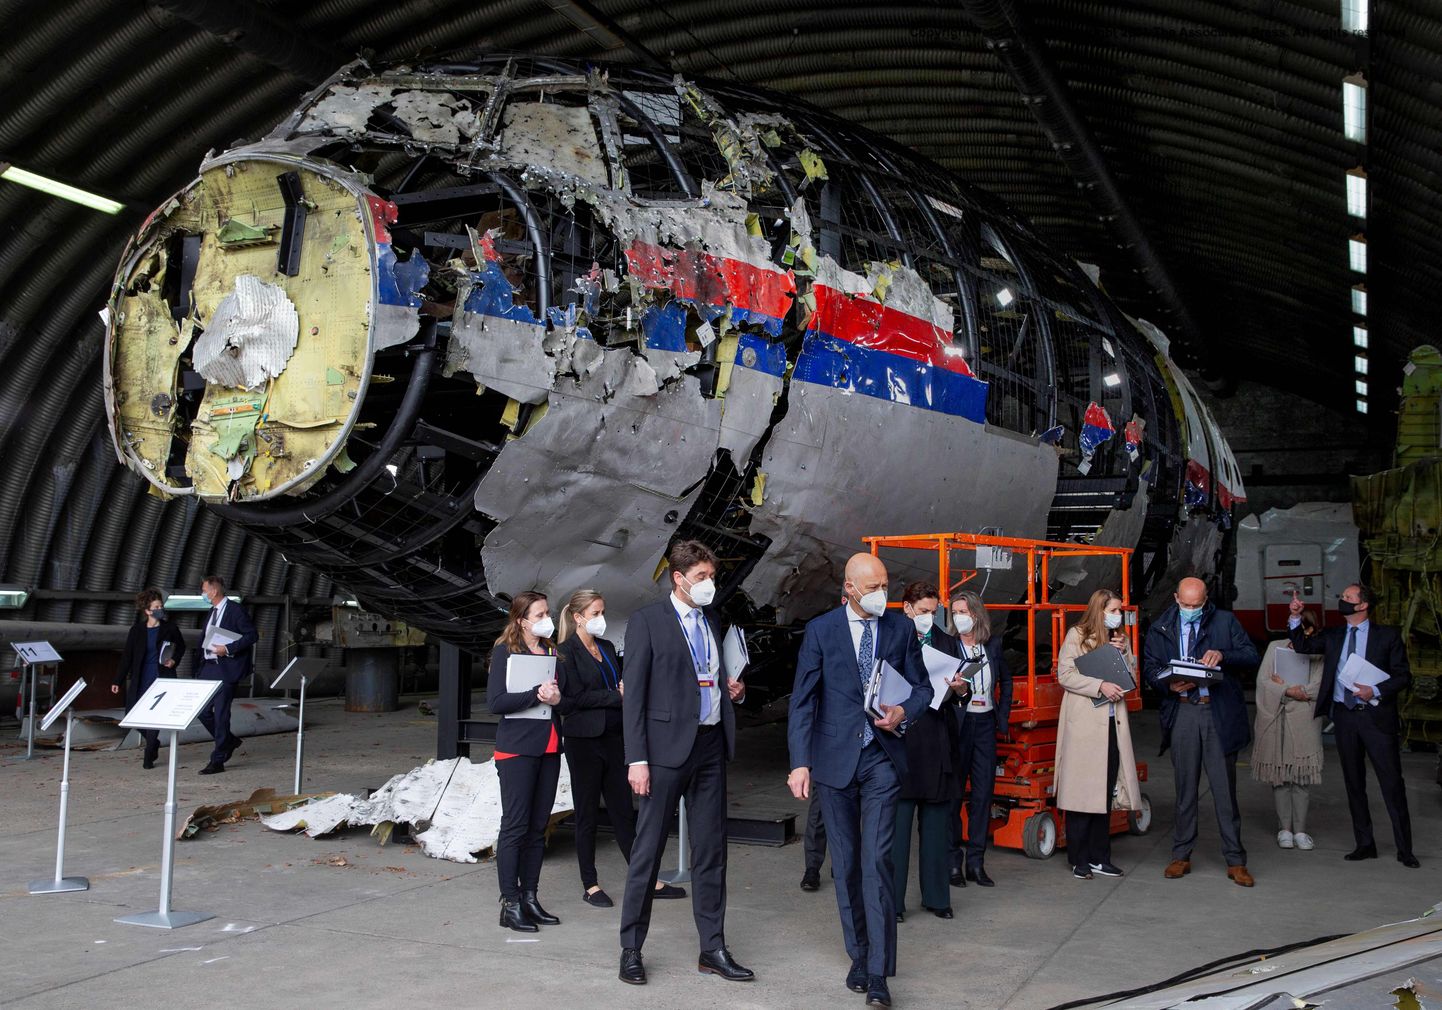 (FILES) In this file photo taken on May 26, 2021 presiding judge Hendrik Steenhuis (C), other trial judges and lawyers view the reconstructed wreckage of Malaysia Airlines Flight MH17, at the Gilze-Rijen military Airbase. - Dutch judges will on June 7, 2021 start hearing evidence against three Russian suspects and a Ukrainian in the downing of Malaysia Airlines flight MH17 over war-torn Ukraine in 2014. (Photo by Peter Dejong / POOL / AFP)